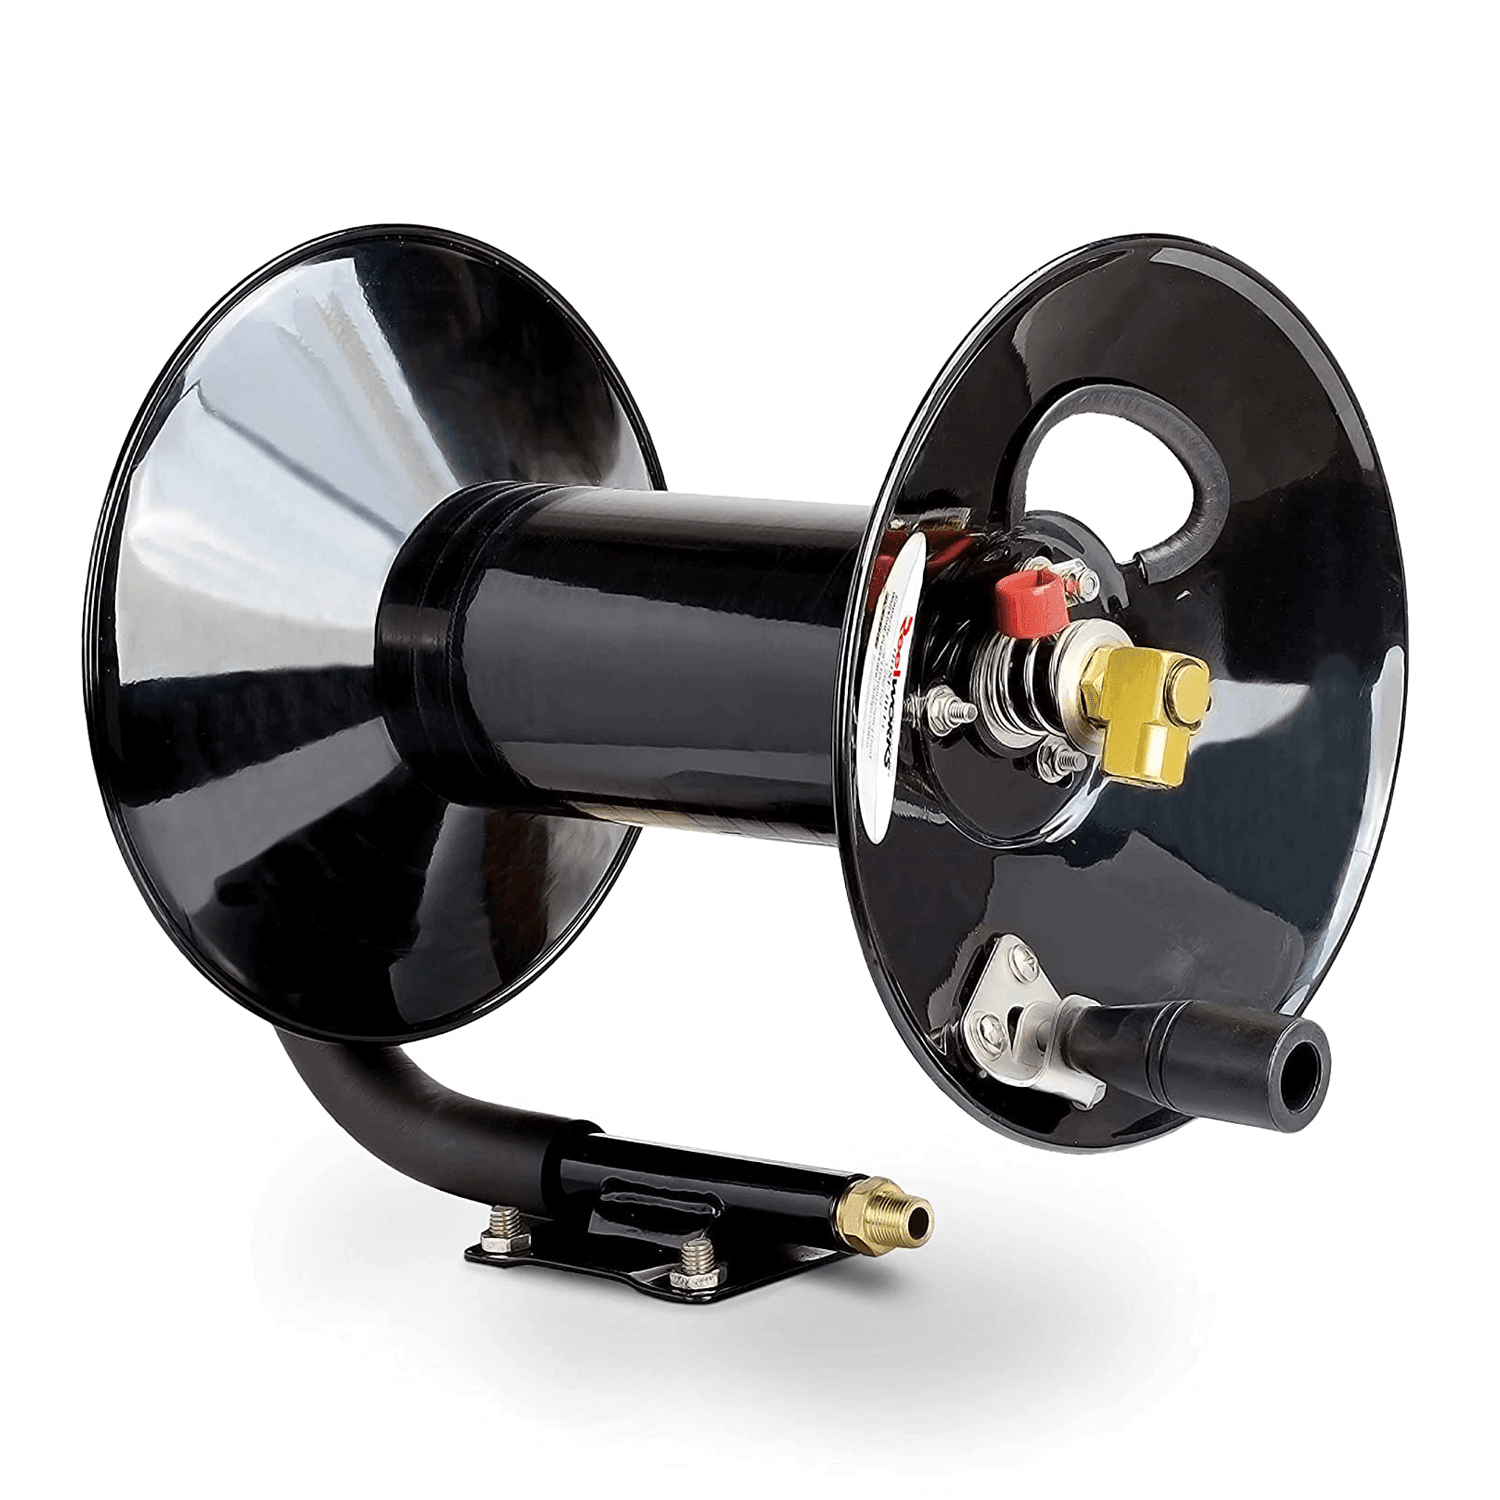 ReelWorks Mountable Manual Hose Reel Crank - Fits up to 100' Ft of 3/8